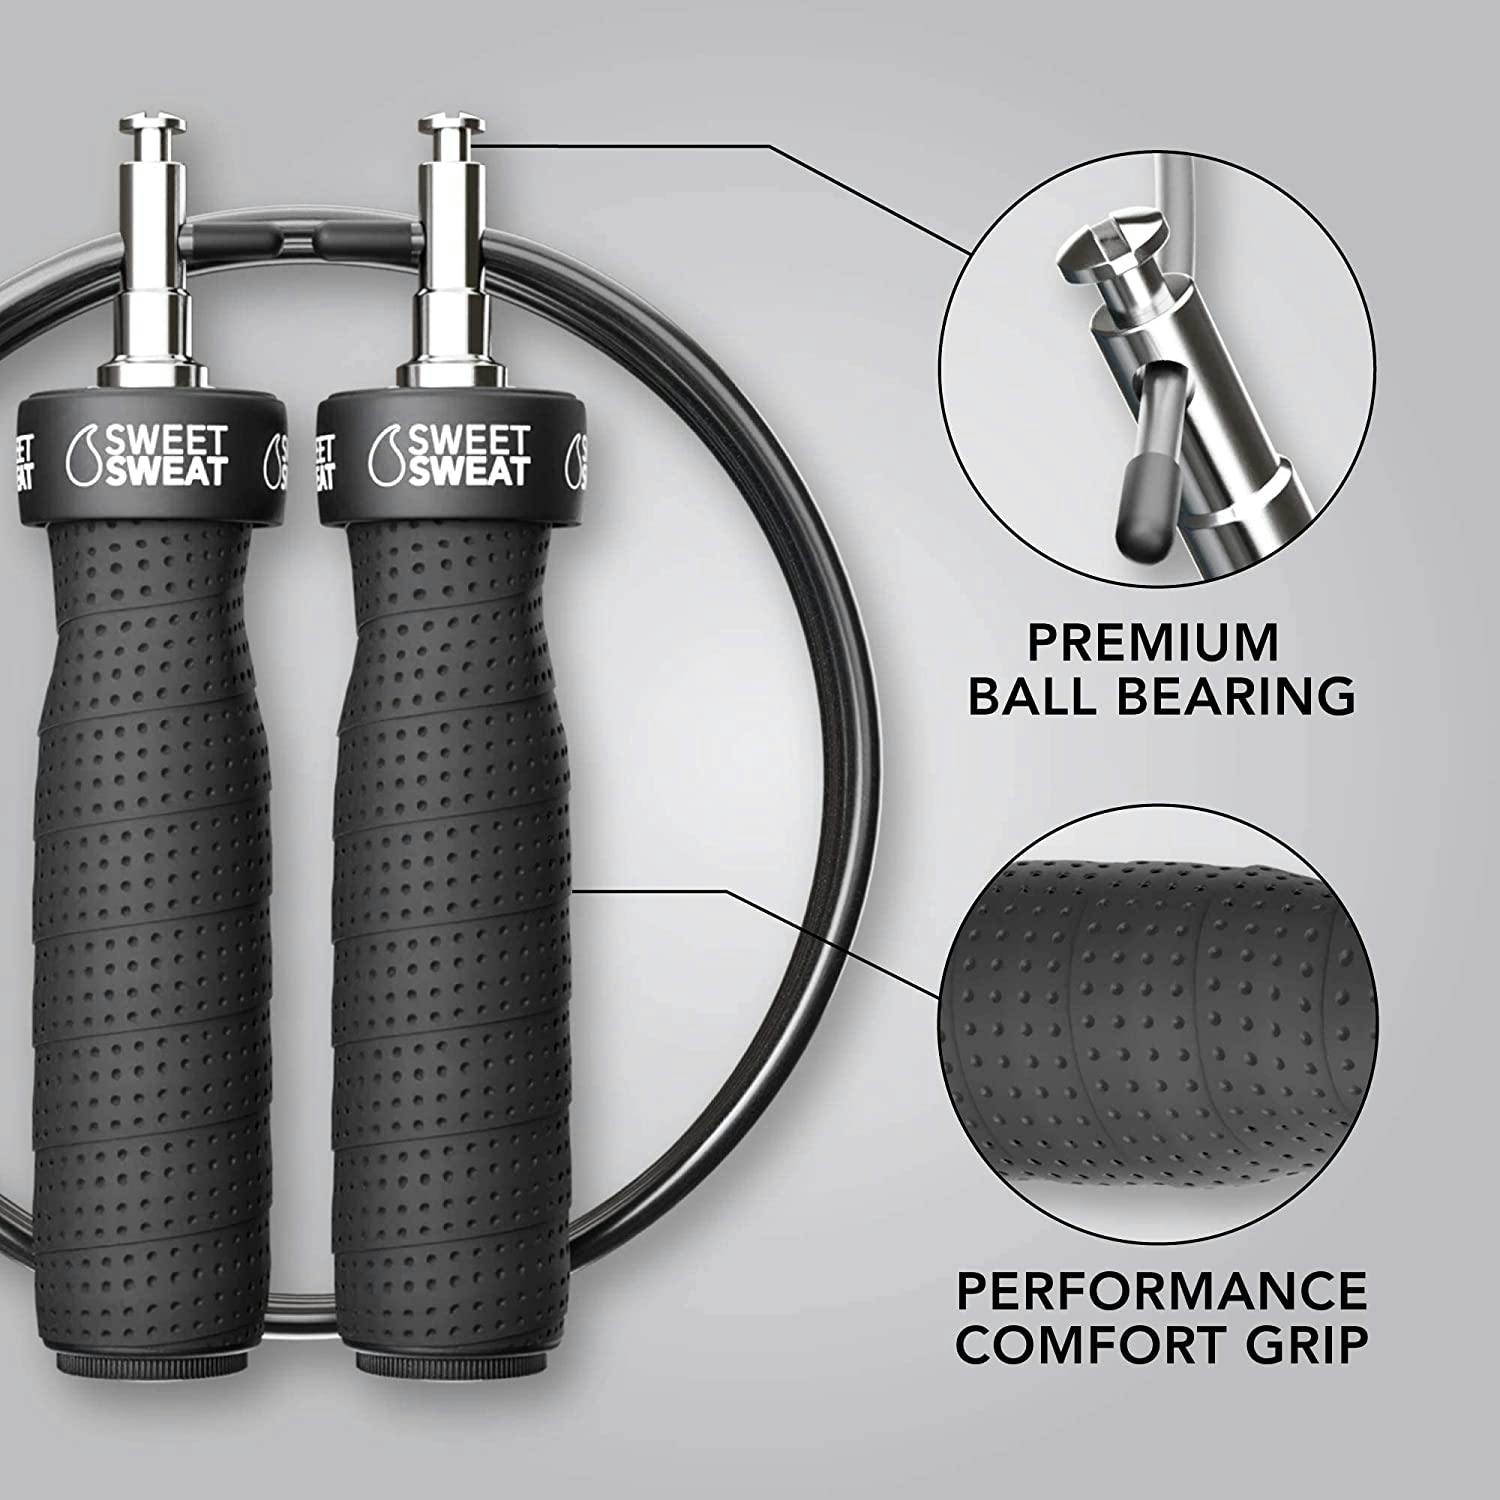 Sweet Sweat® Weighted Jump Rope features infographic.